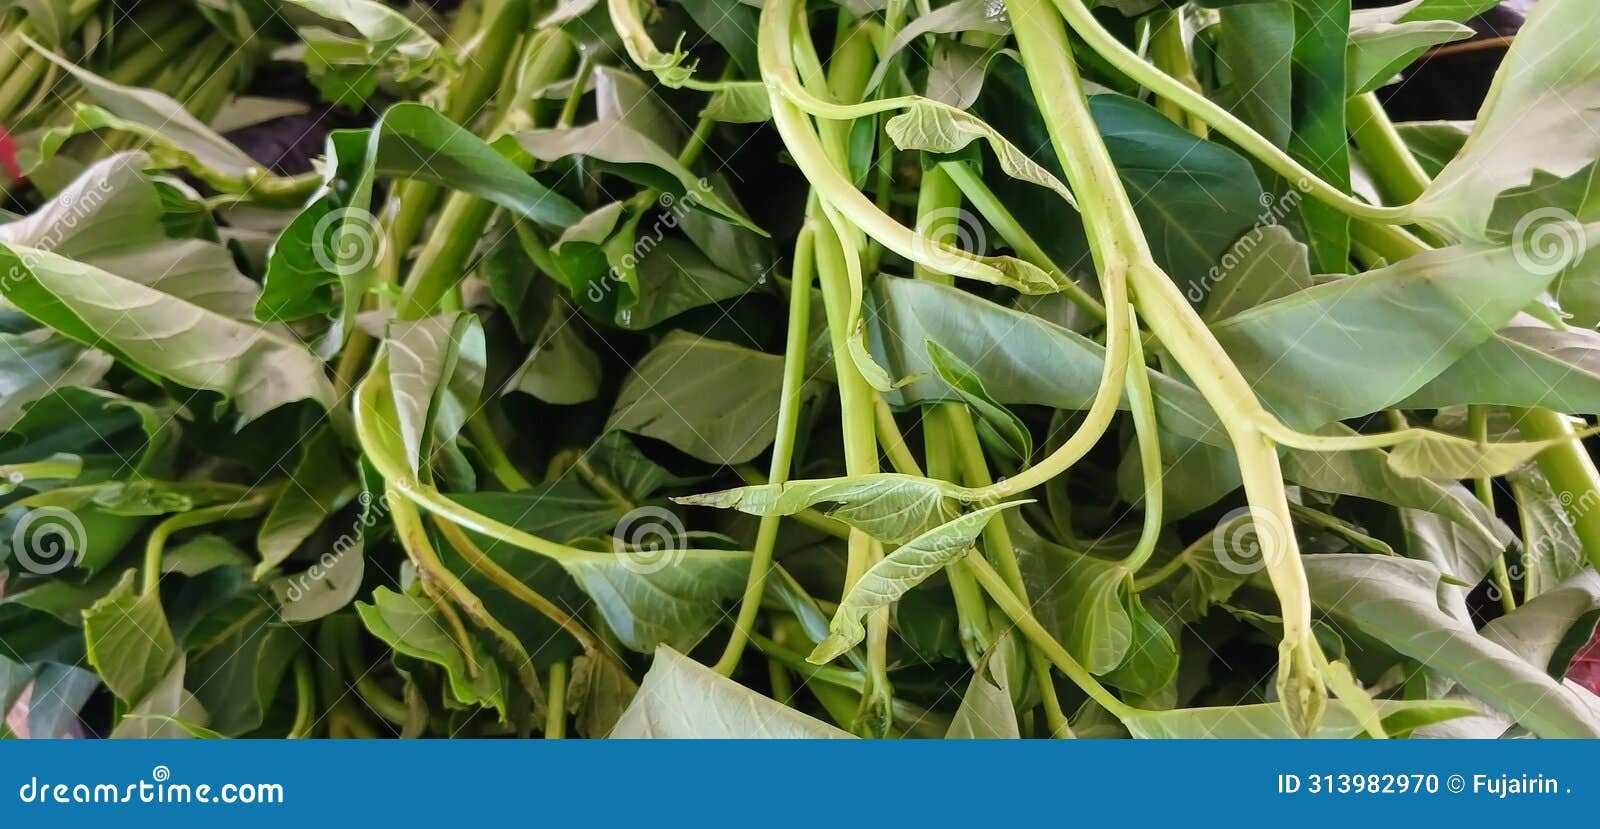 kangkung plant from traditional market